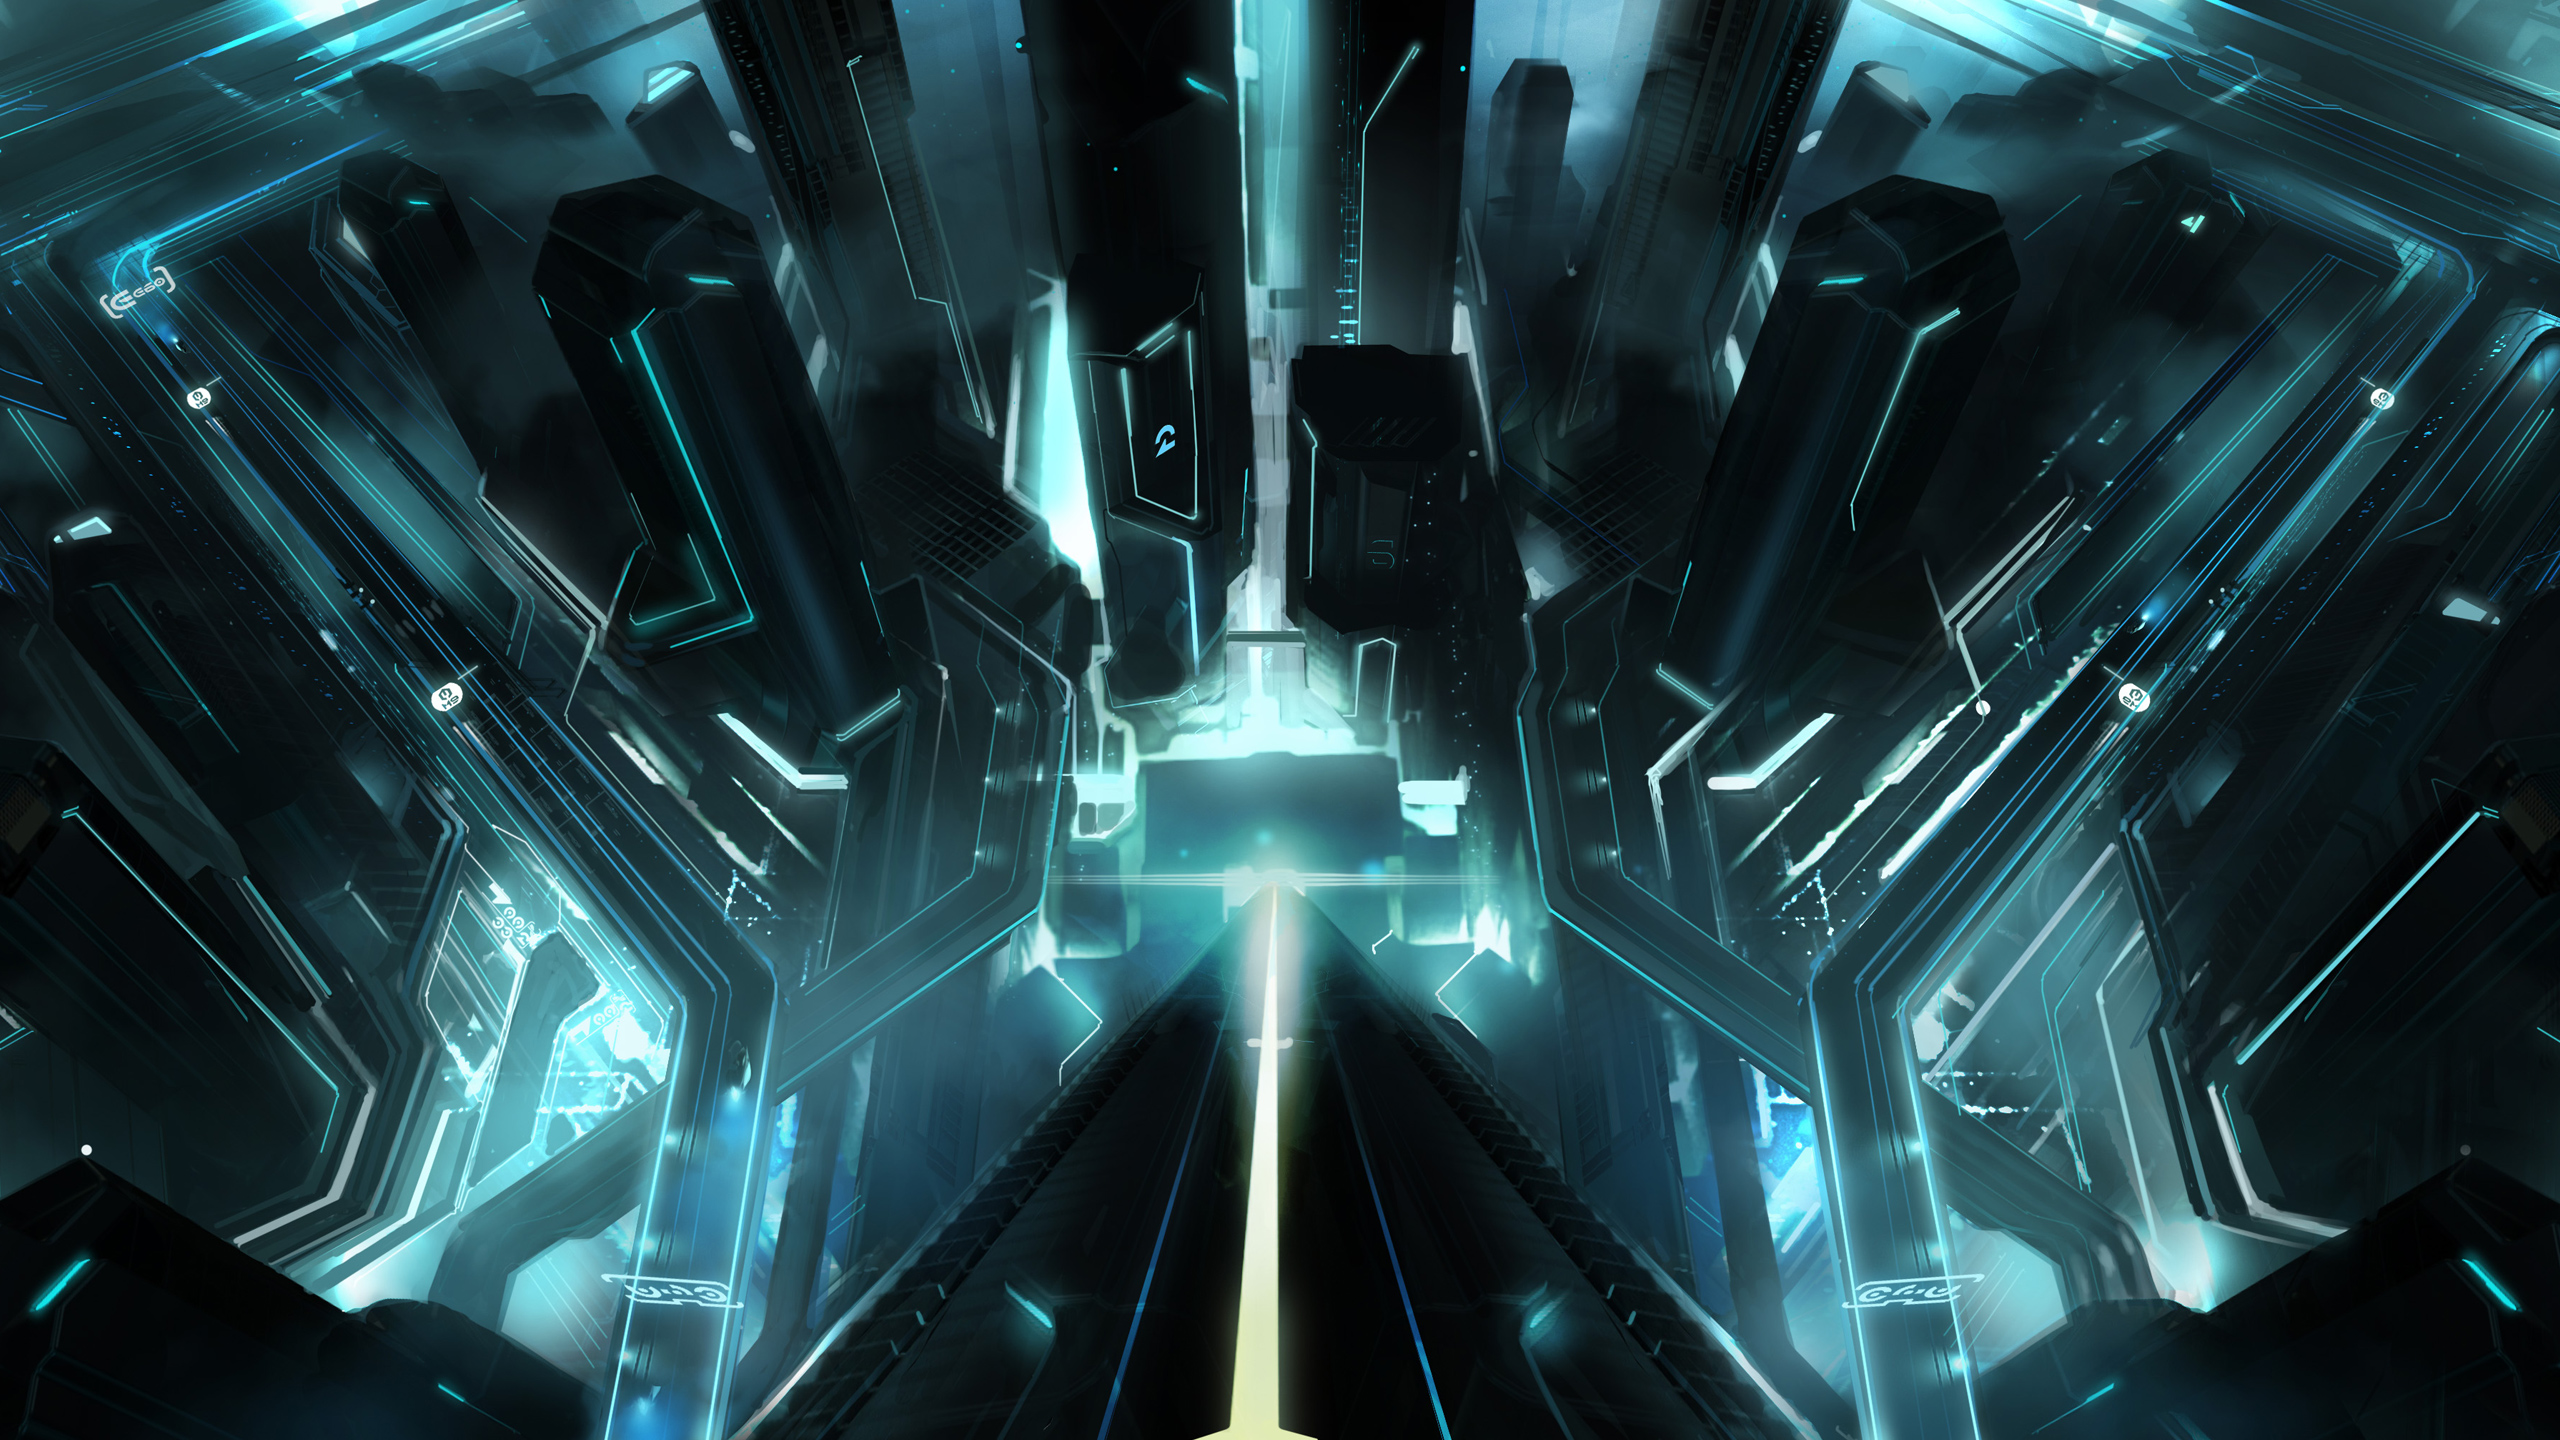 Tron City Wallpapers HD Wallpapers 2560x1440